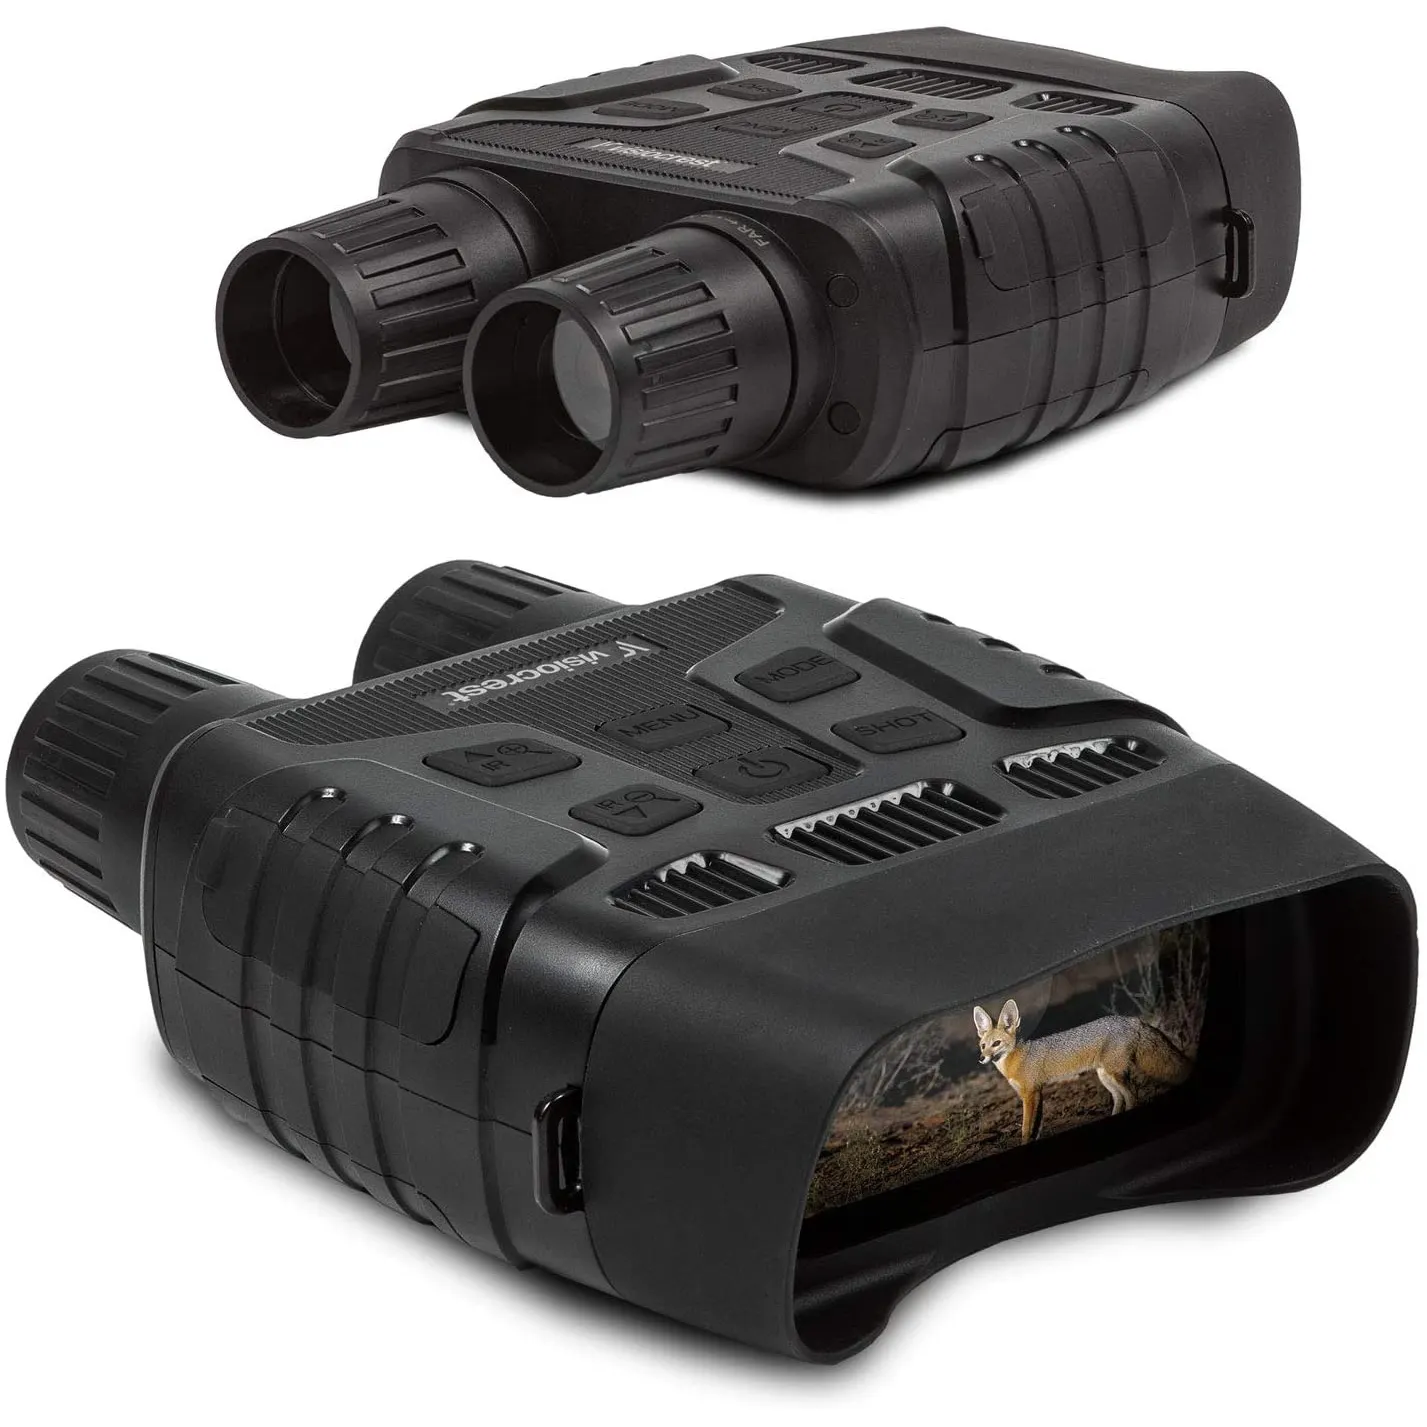 Amazon Top Seller Military Night Vision Infrared Binocular Prices Hunting